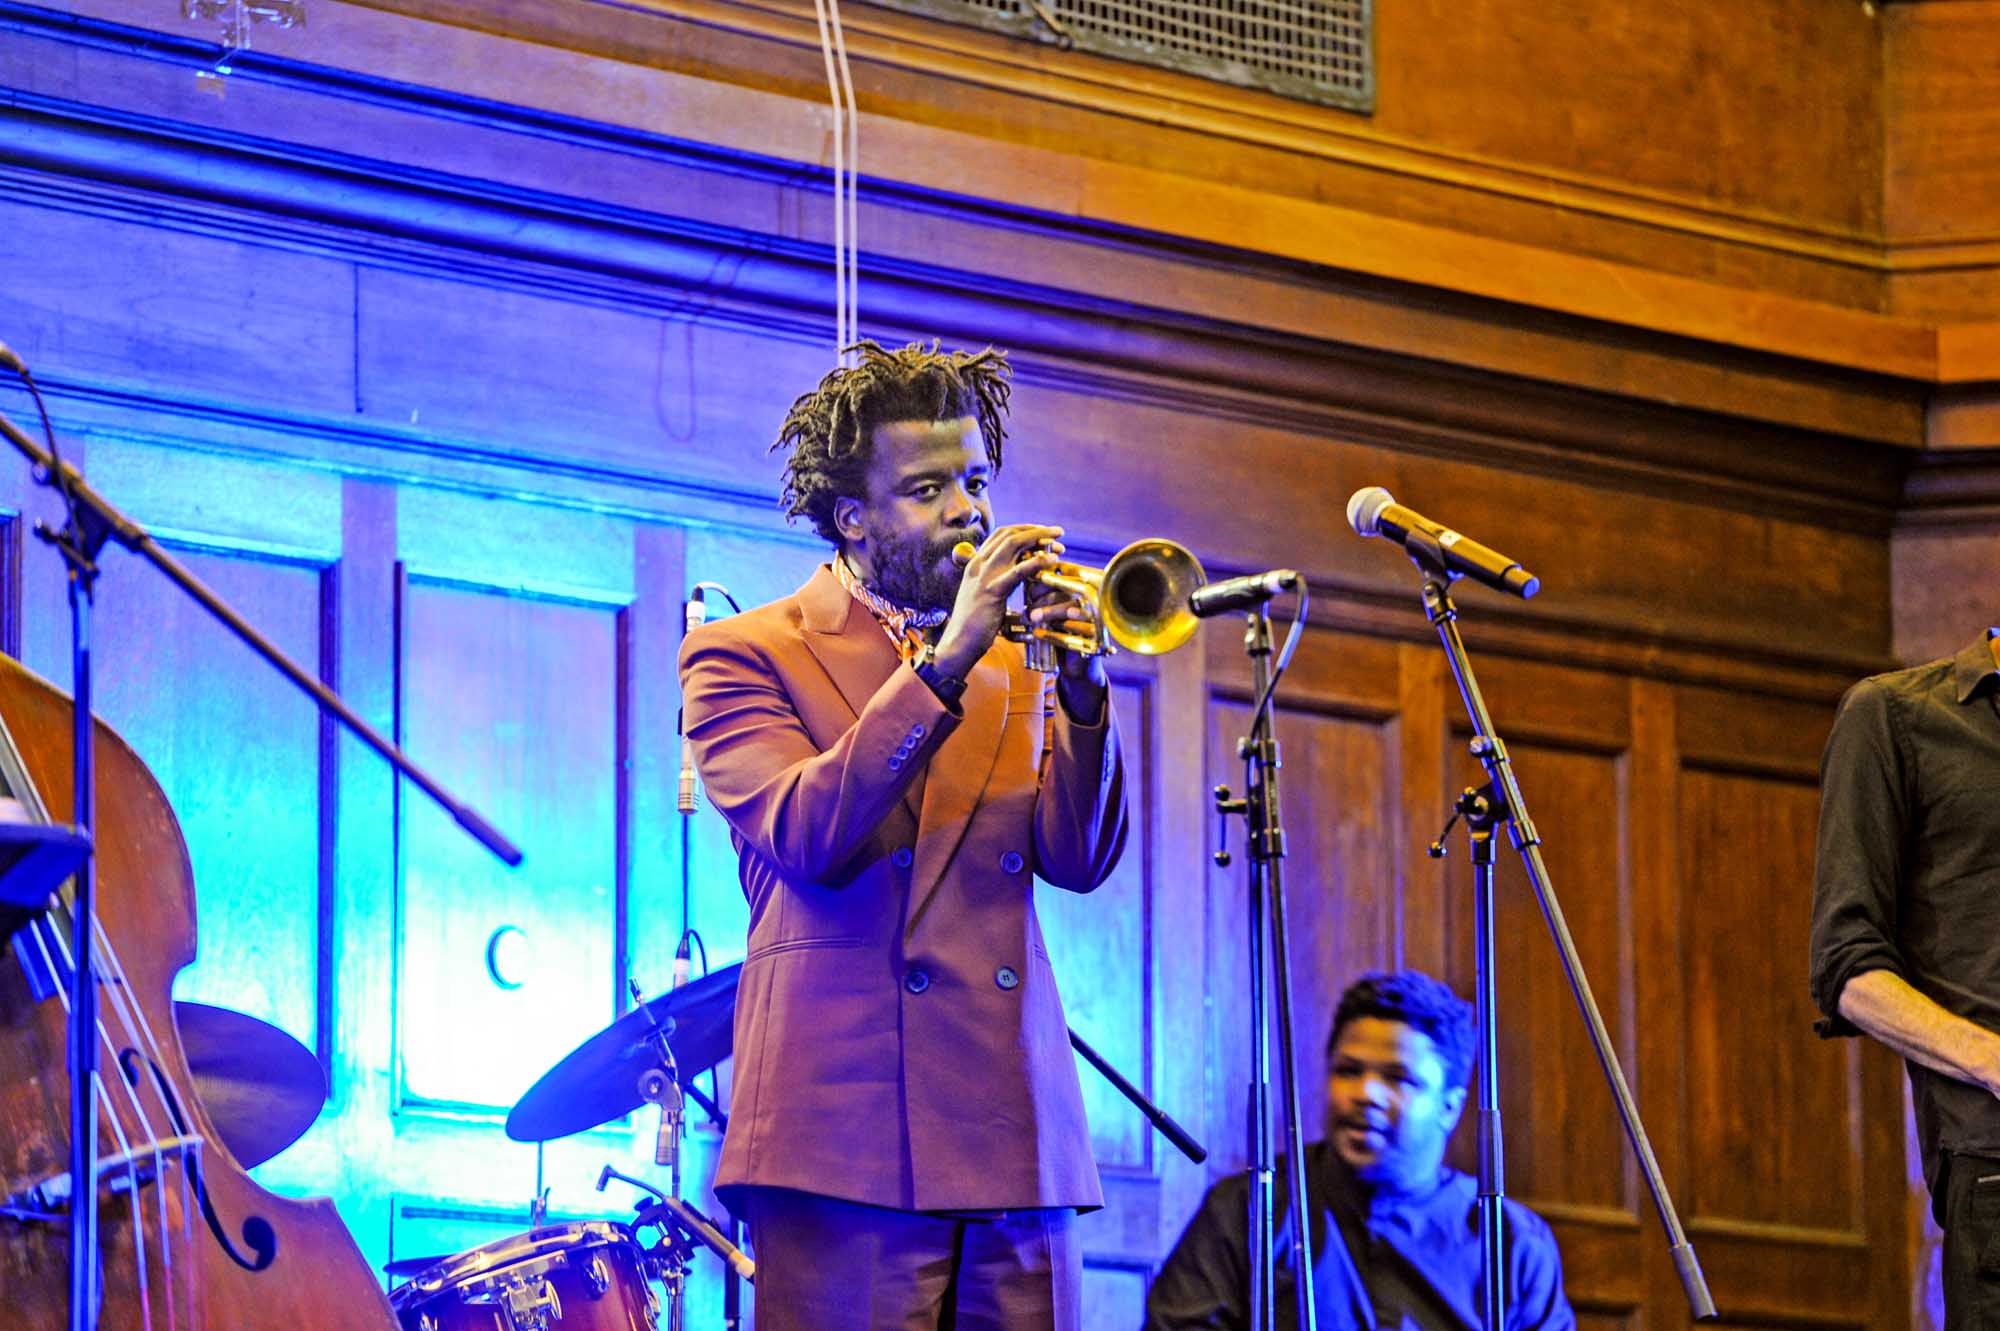 Mandisi Dyantyis performed at the University of the Future event, which was hosted by the Students’ Representative Council (SRC) and the steering committee, and provided an exciting opportunity to rethink, redesign and realign our current infrastructure and services in response to the Call for Ideas on 9 September.